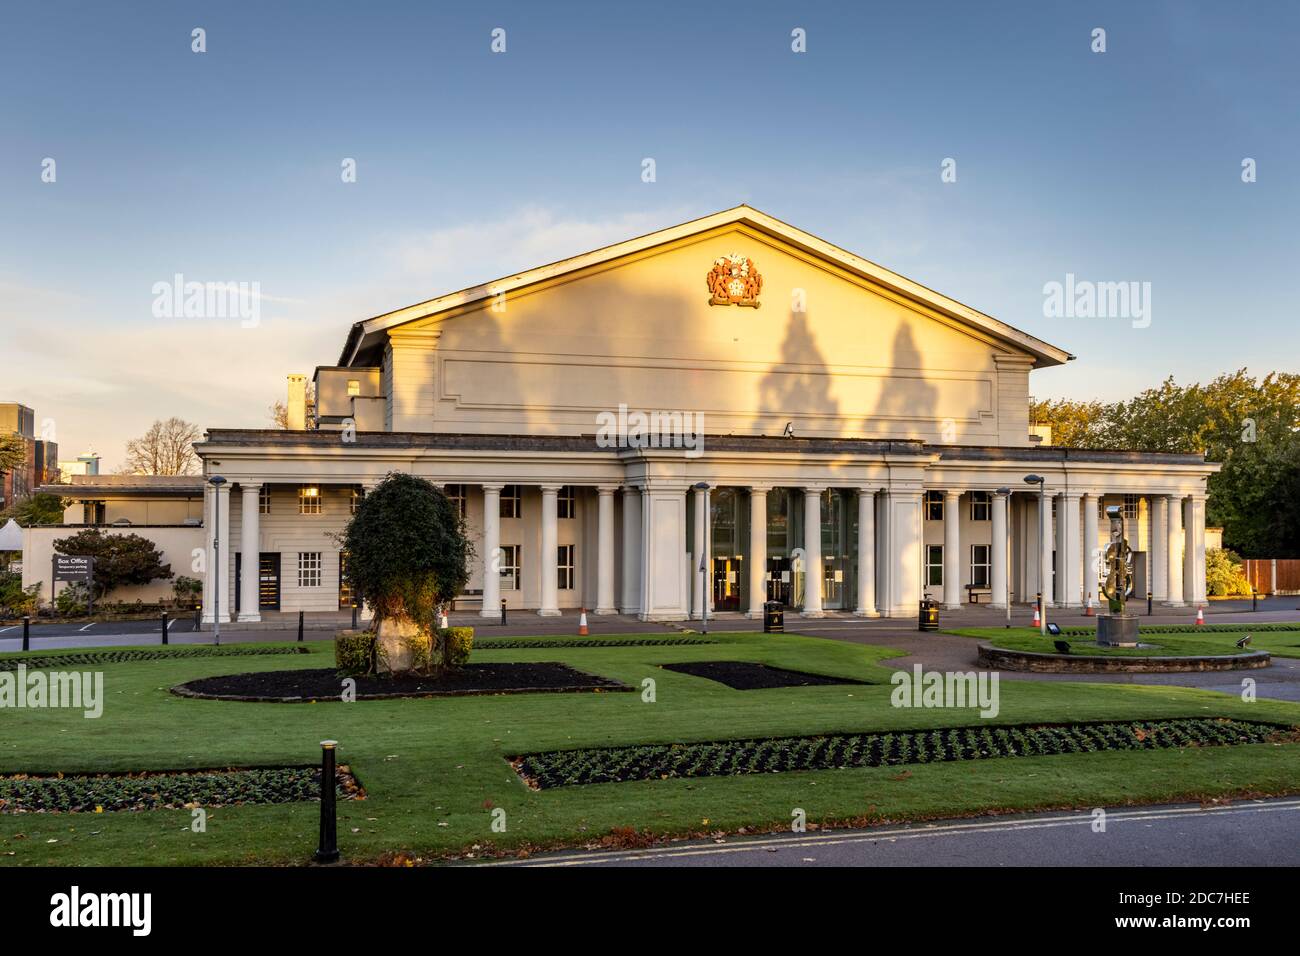 The De Montfort Hall live music and performance venue in Leicester, England Stock Photo